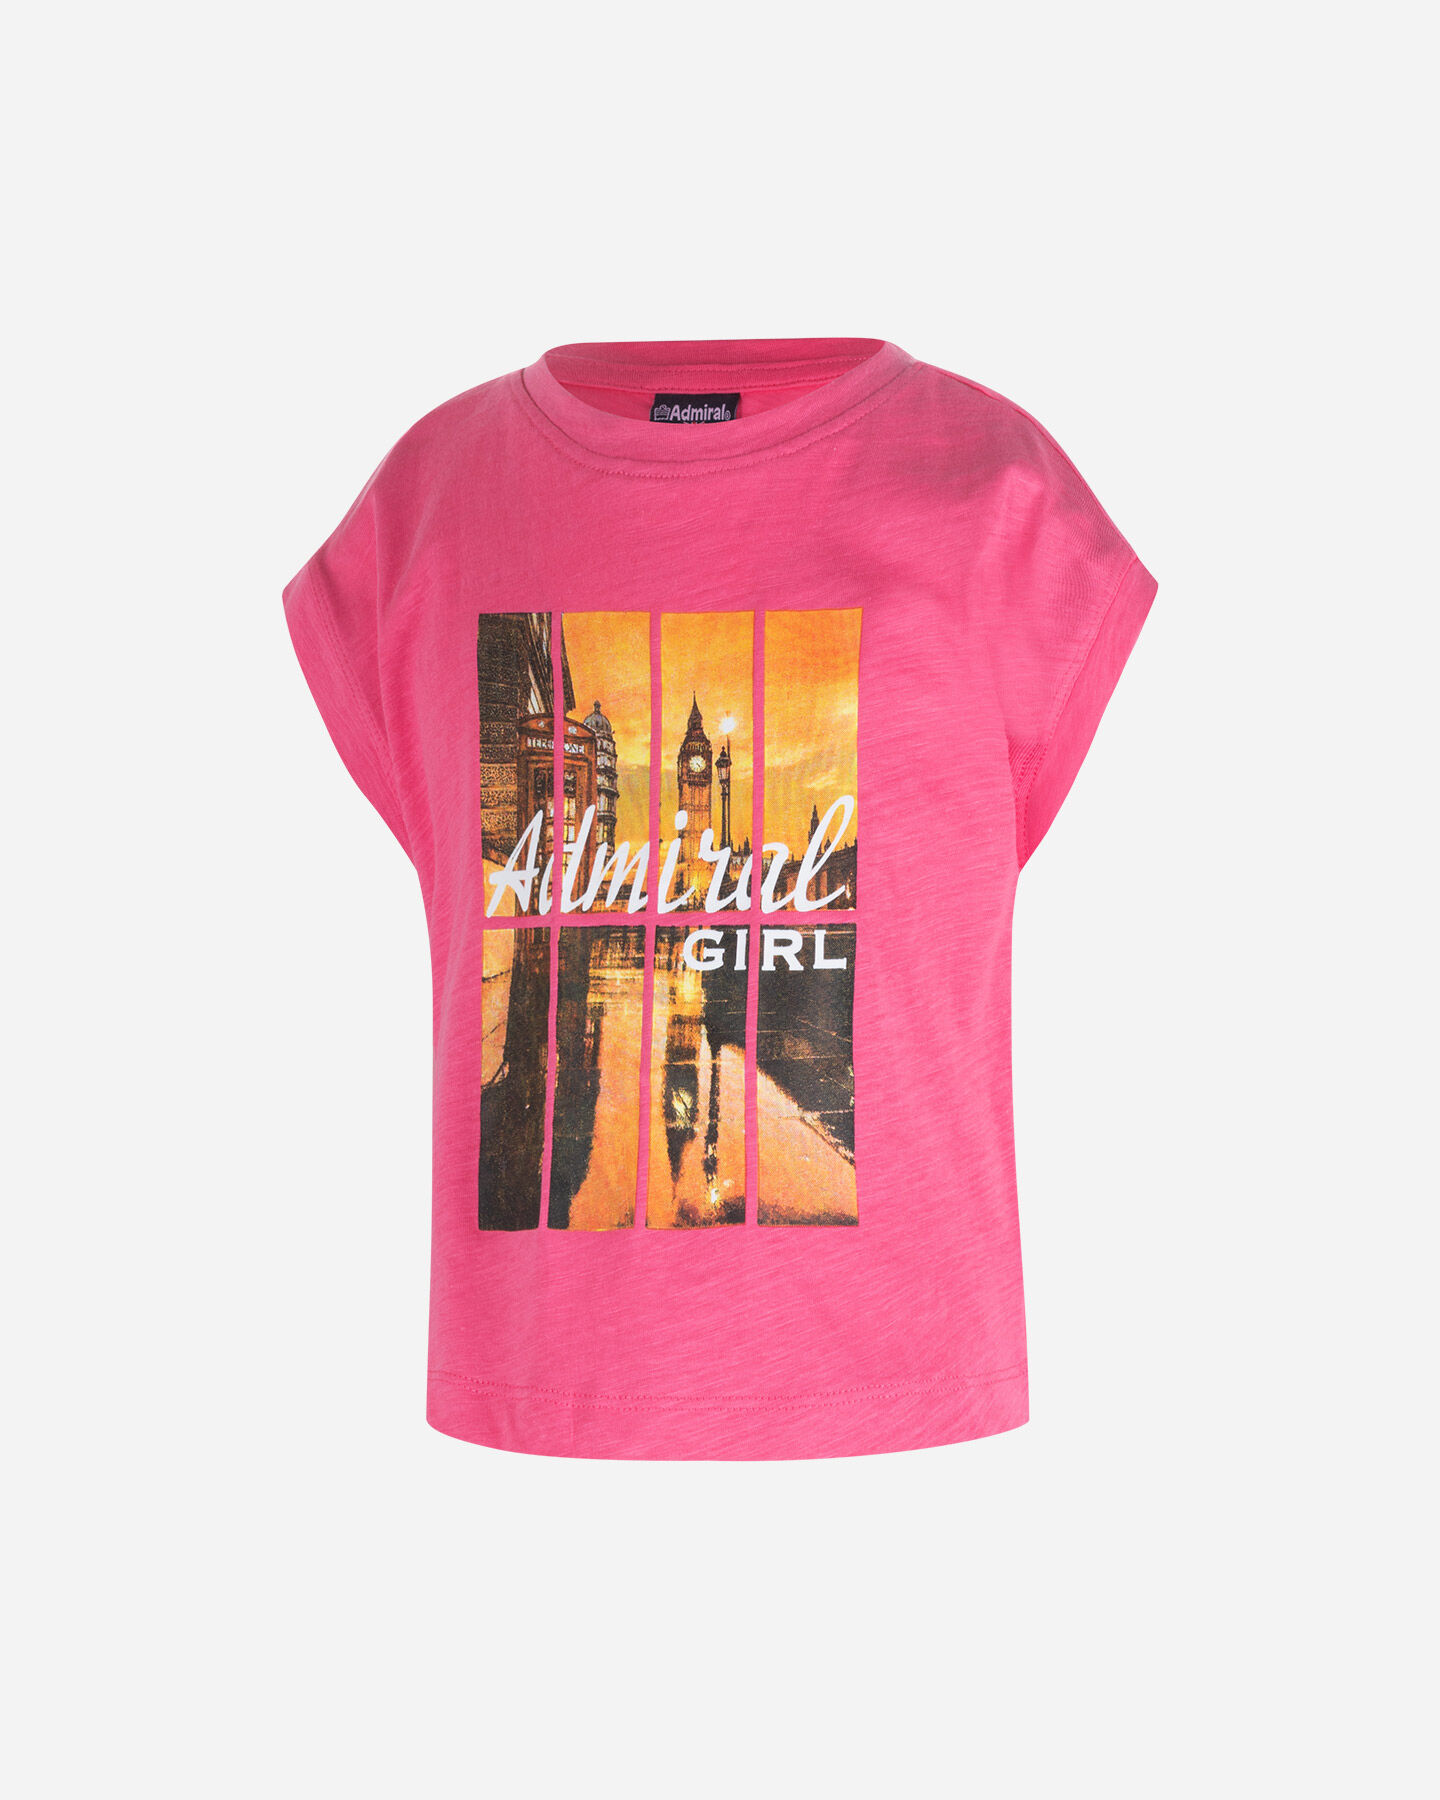  T-Shirt ADMIRAL LIFESTYLE JR S4119267|400|8A scatto 0